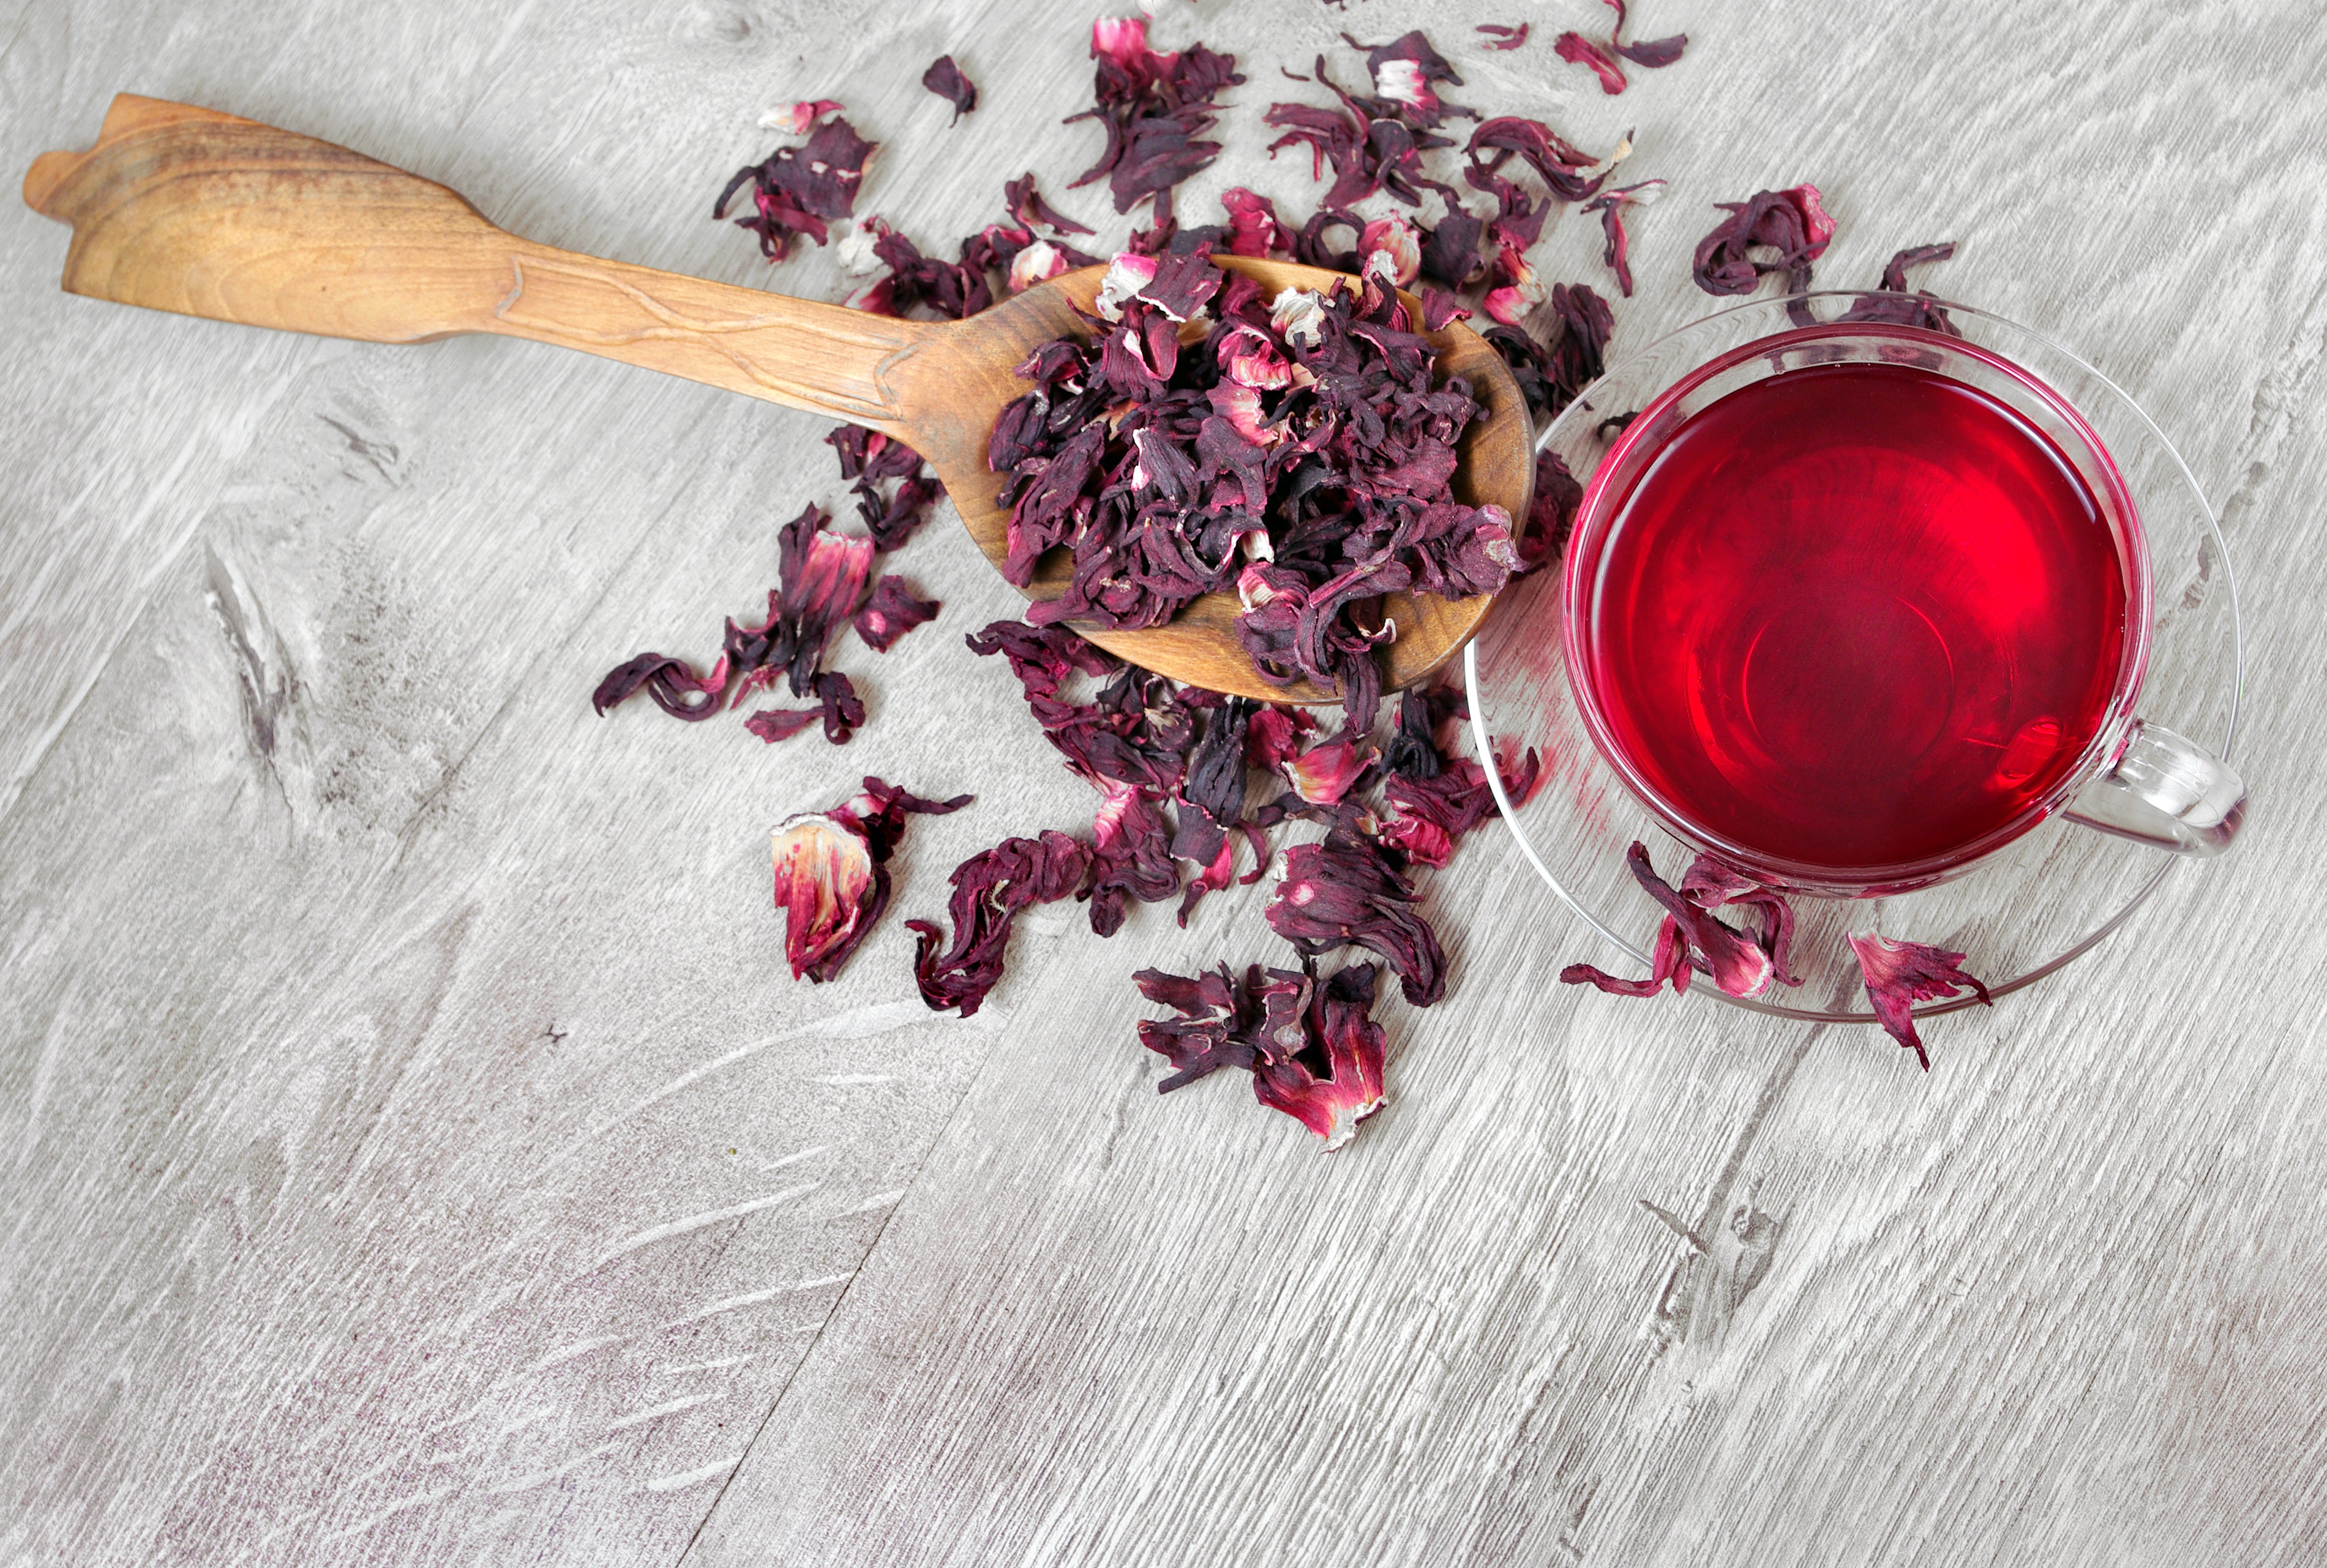 What are the Benefits Of Hibiscus Flower?